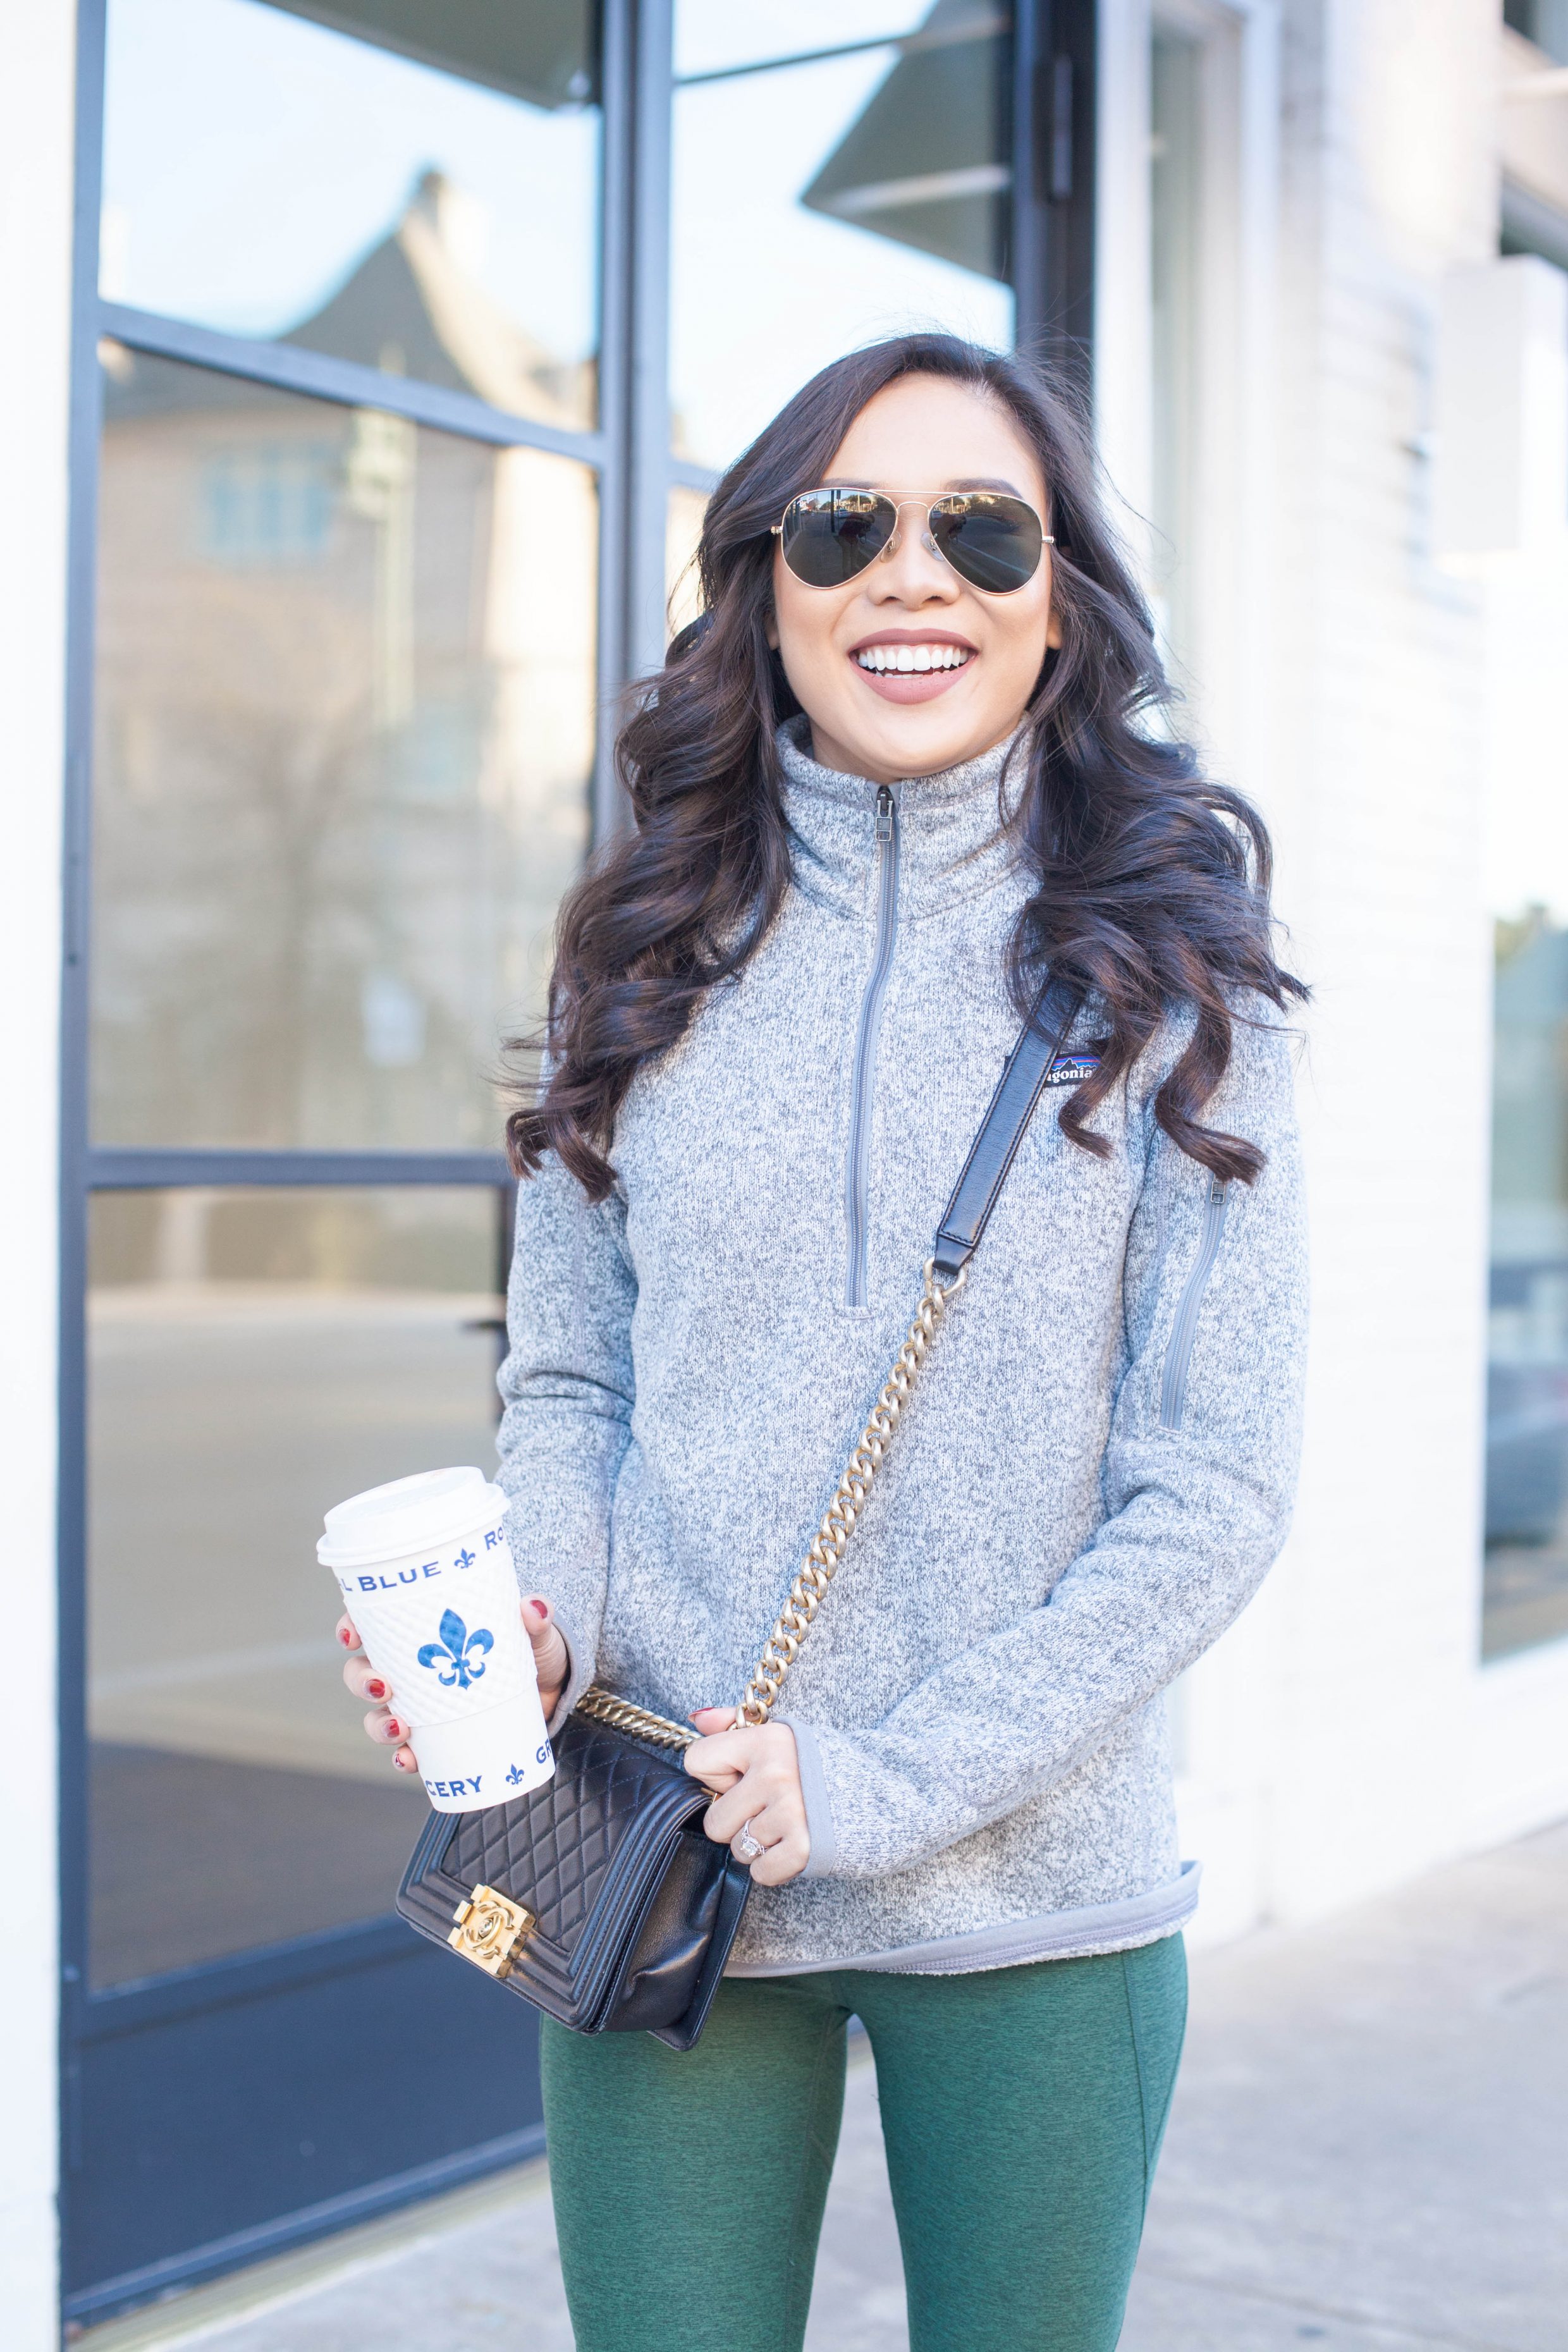 Sporty winter look with a cozy pullover and cute sneakers